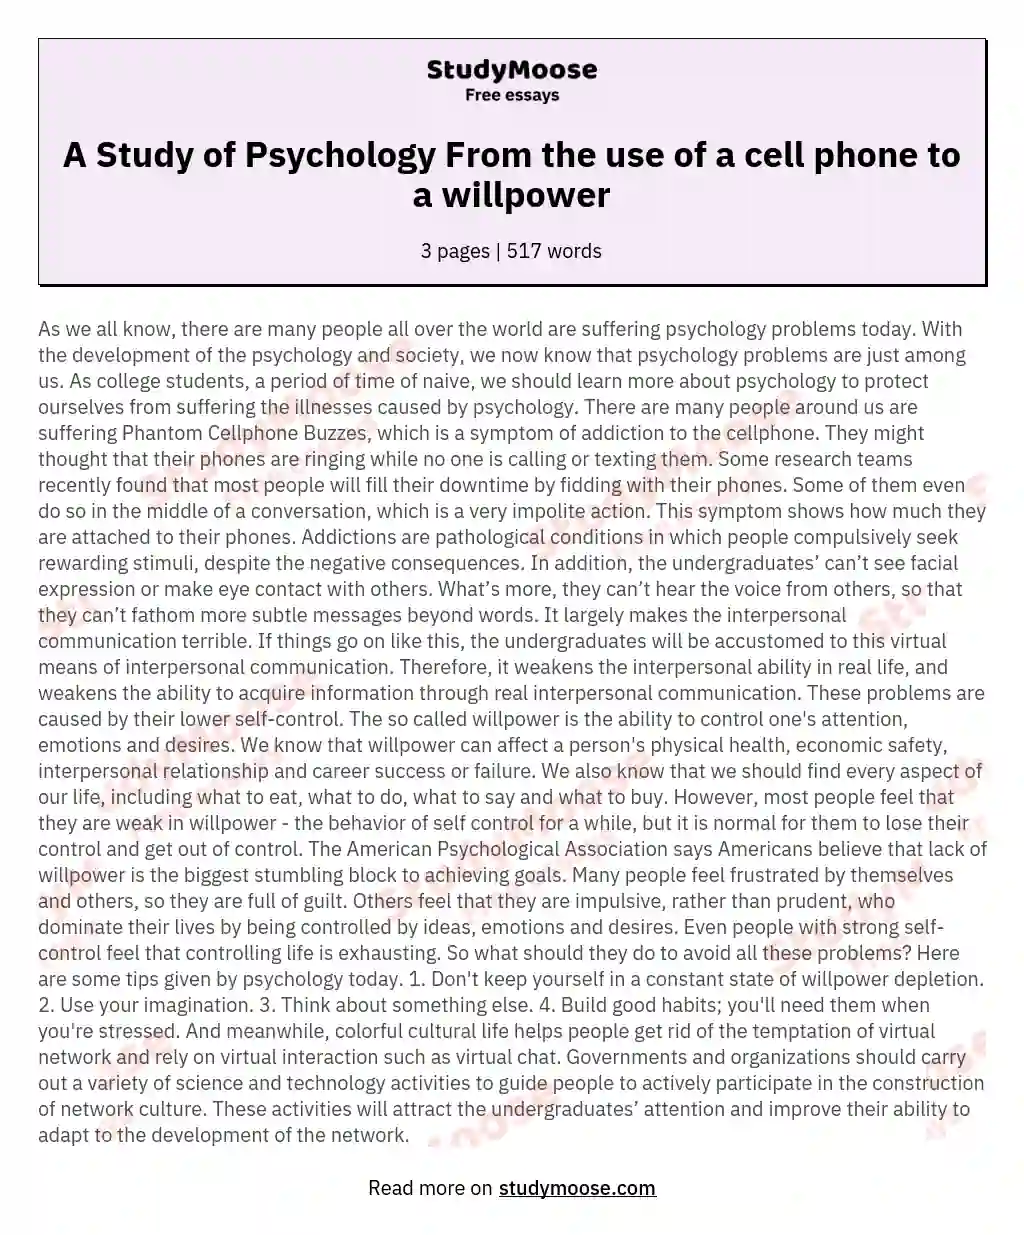 A Study of Psychology From the use of a cell phone to a willpower essay